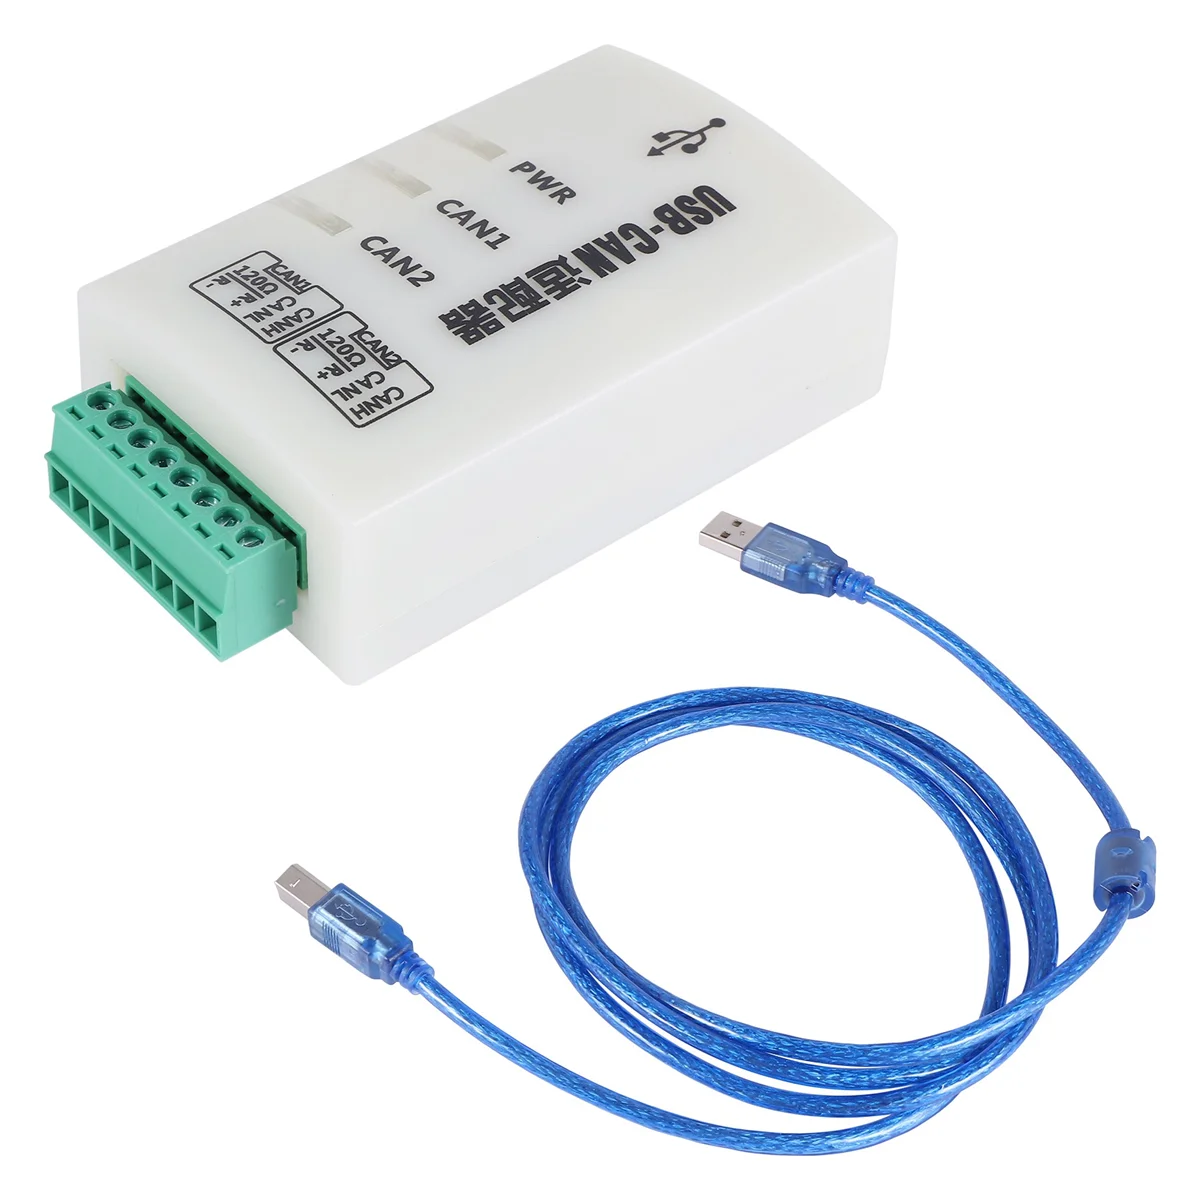 

CAN Bus Analyzer CANOpenJ1939 USBCAN-2A USB to CAN Adapter Dual Path Compatible ZLG